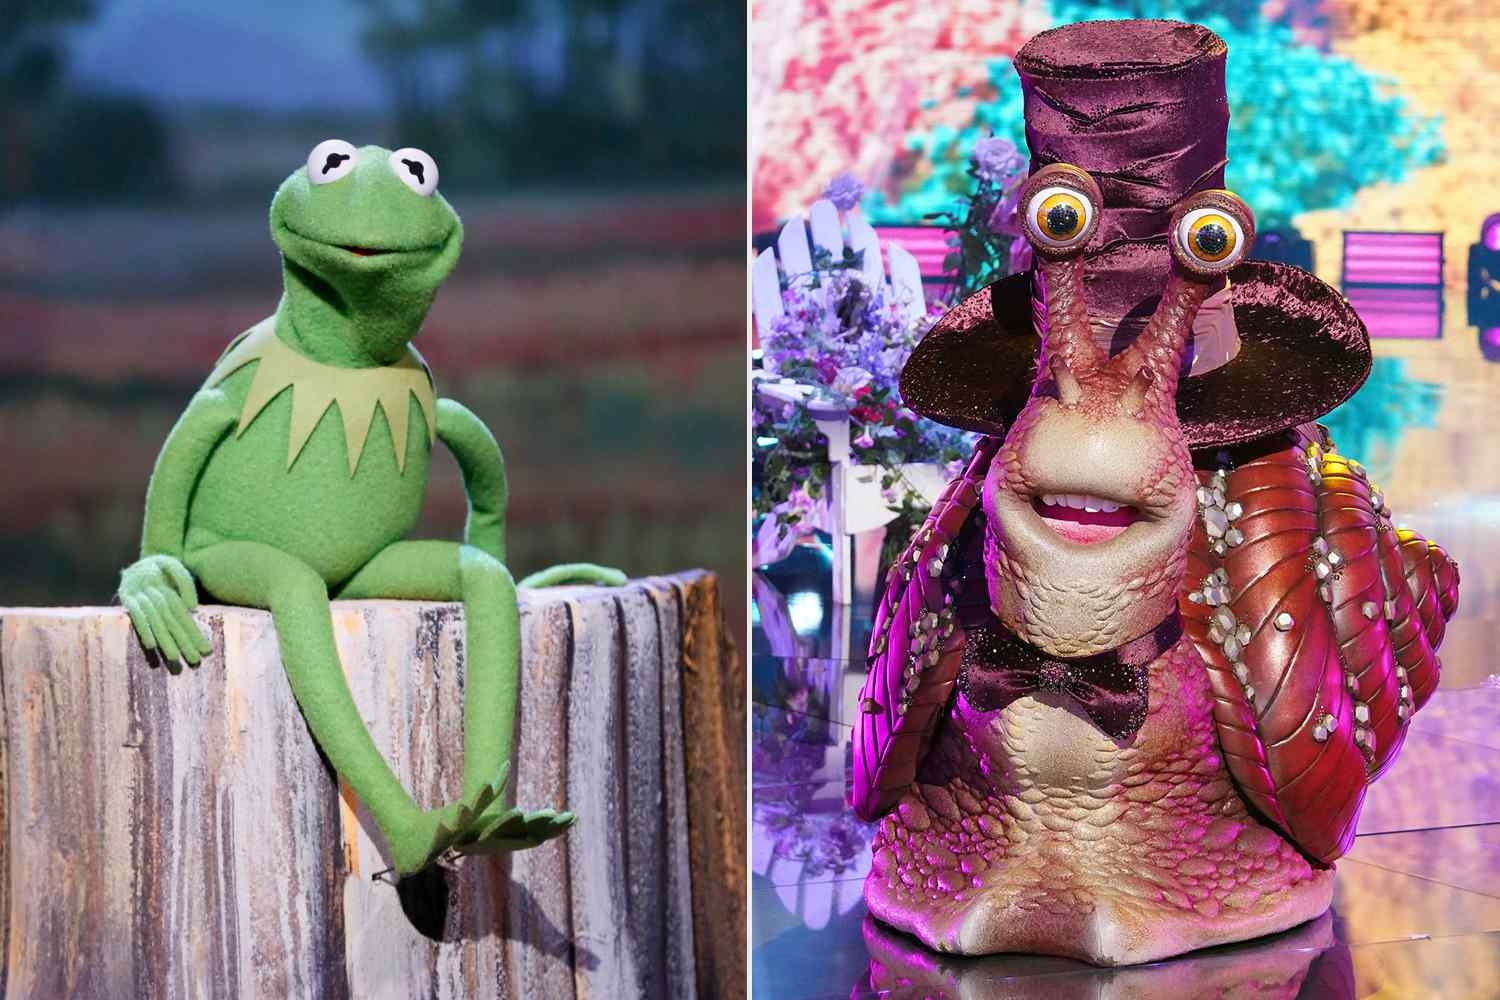 THE MASKED SINGER, Snail, Kermit the Frog